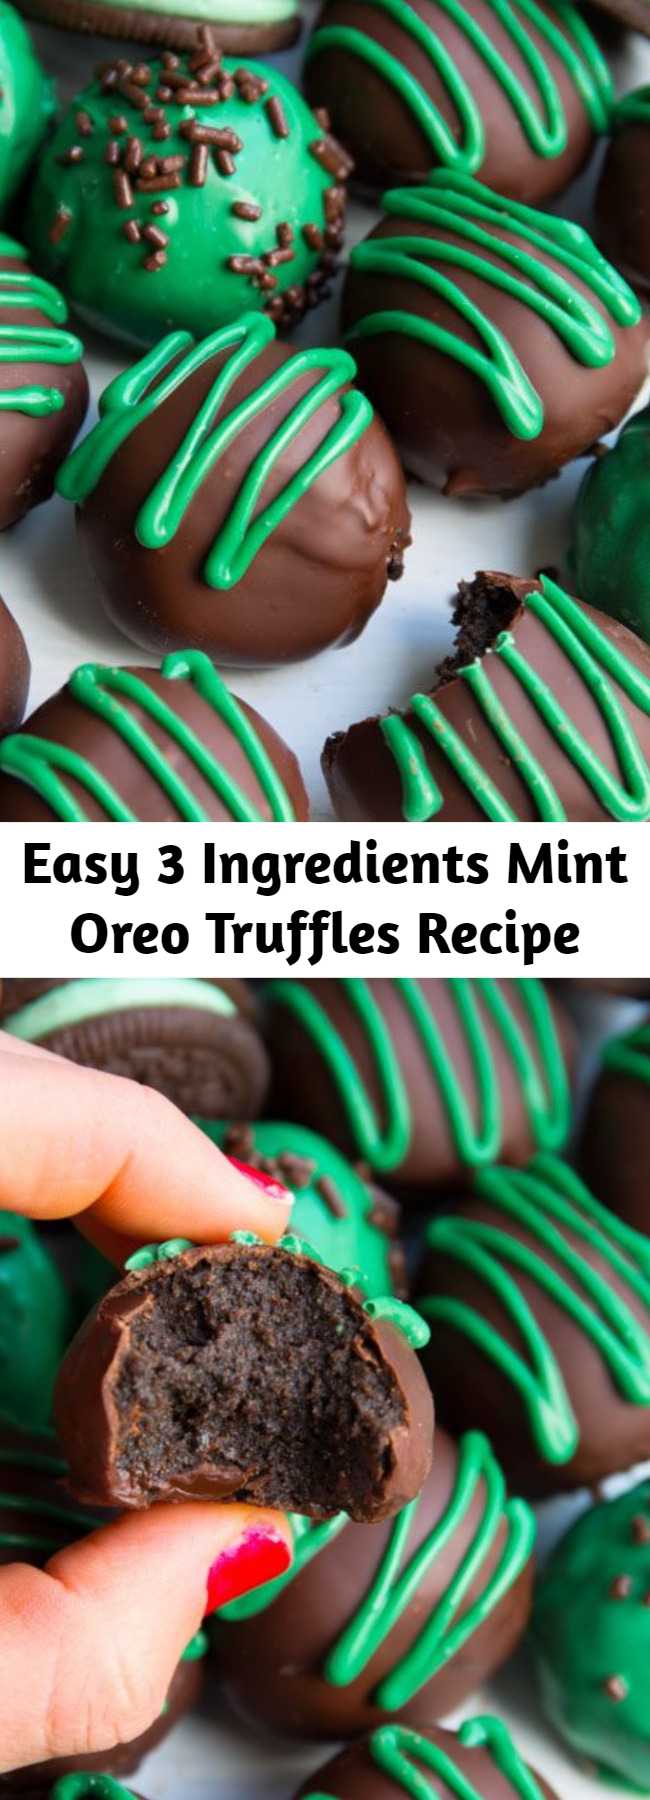 Easy 3 Ingredients Mint Oreo Truffles Recipe - Only 3 ingredients needed to make these mint chocolate truffles. They taste like chocolate-covered Oreo cheesecakes!